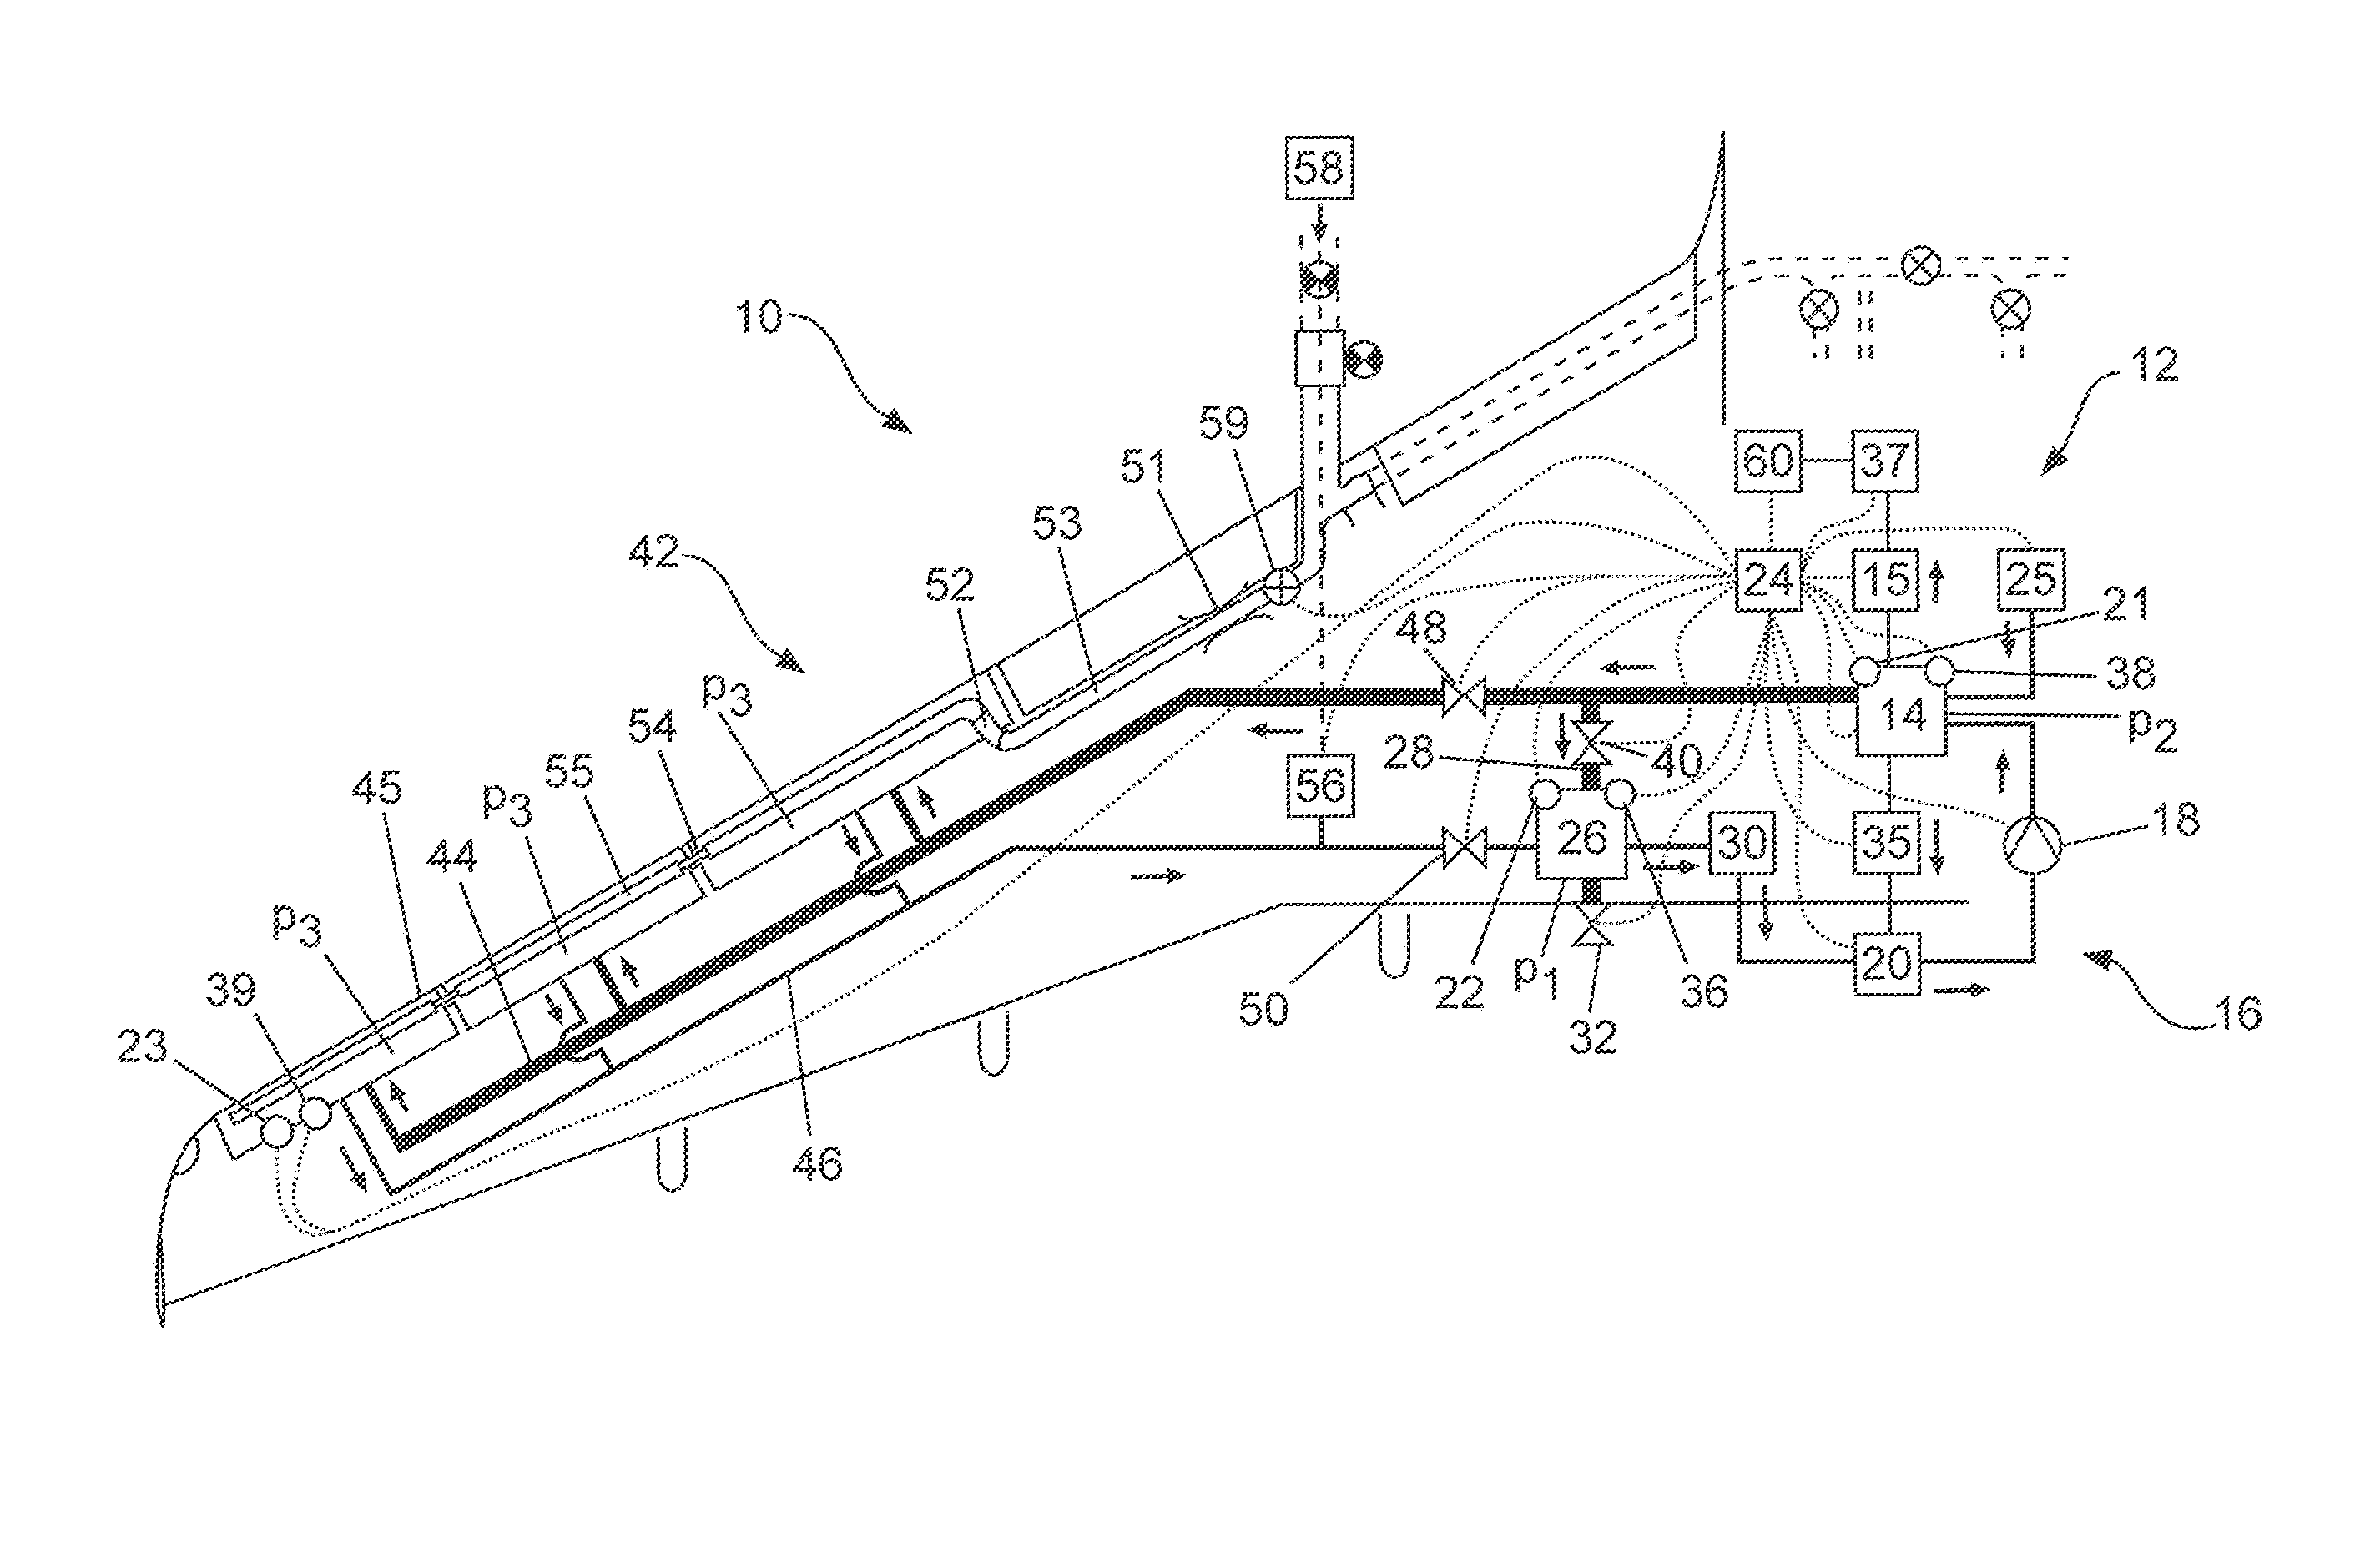 Icing protection system for an aircraft and method for operating an icing protection system